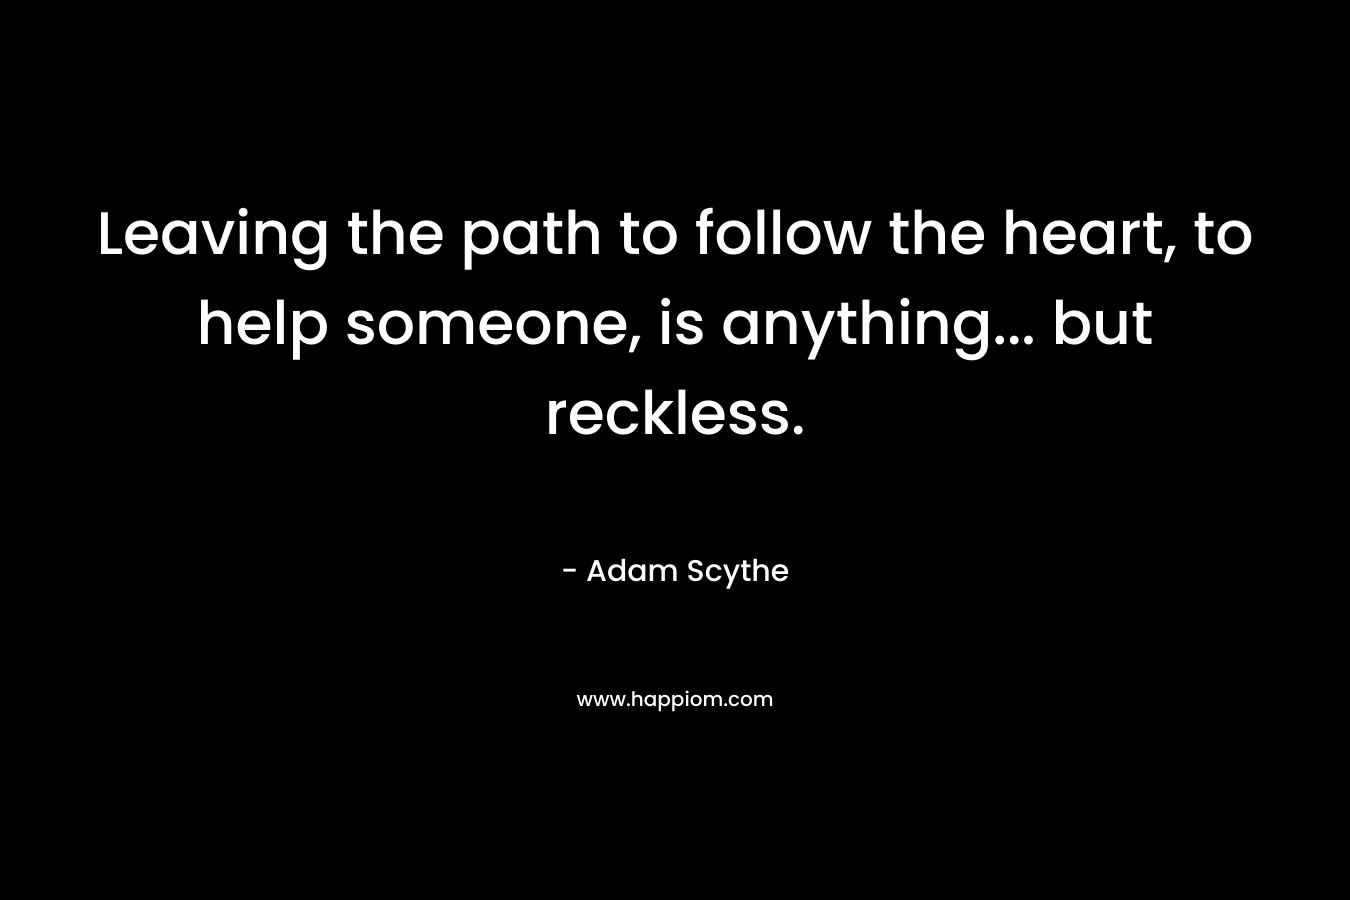 Leaving the path to follow the heart, to help someone, is anything... but reckless.